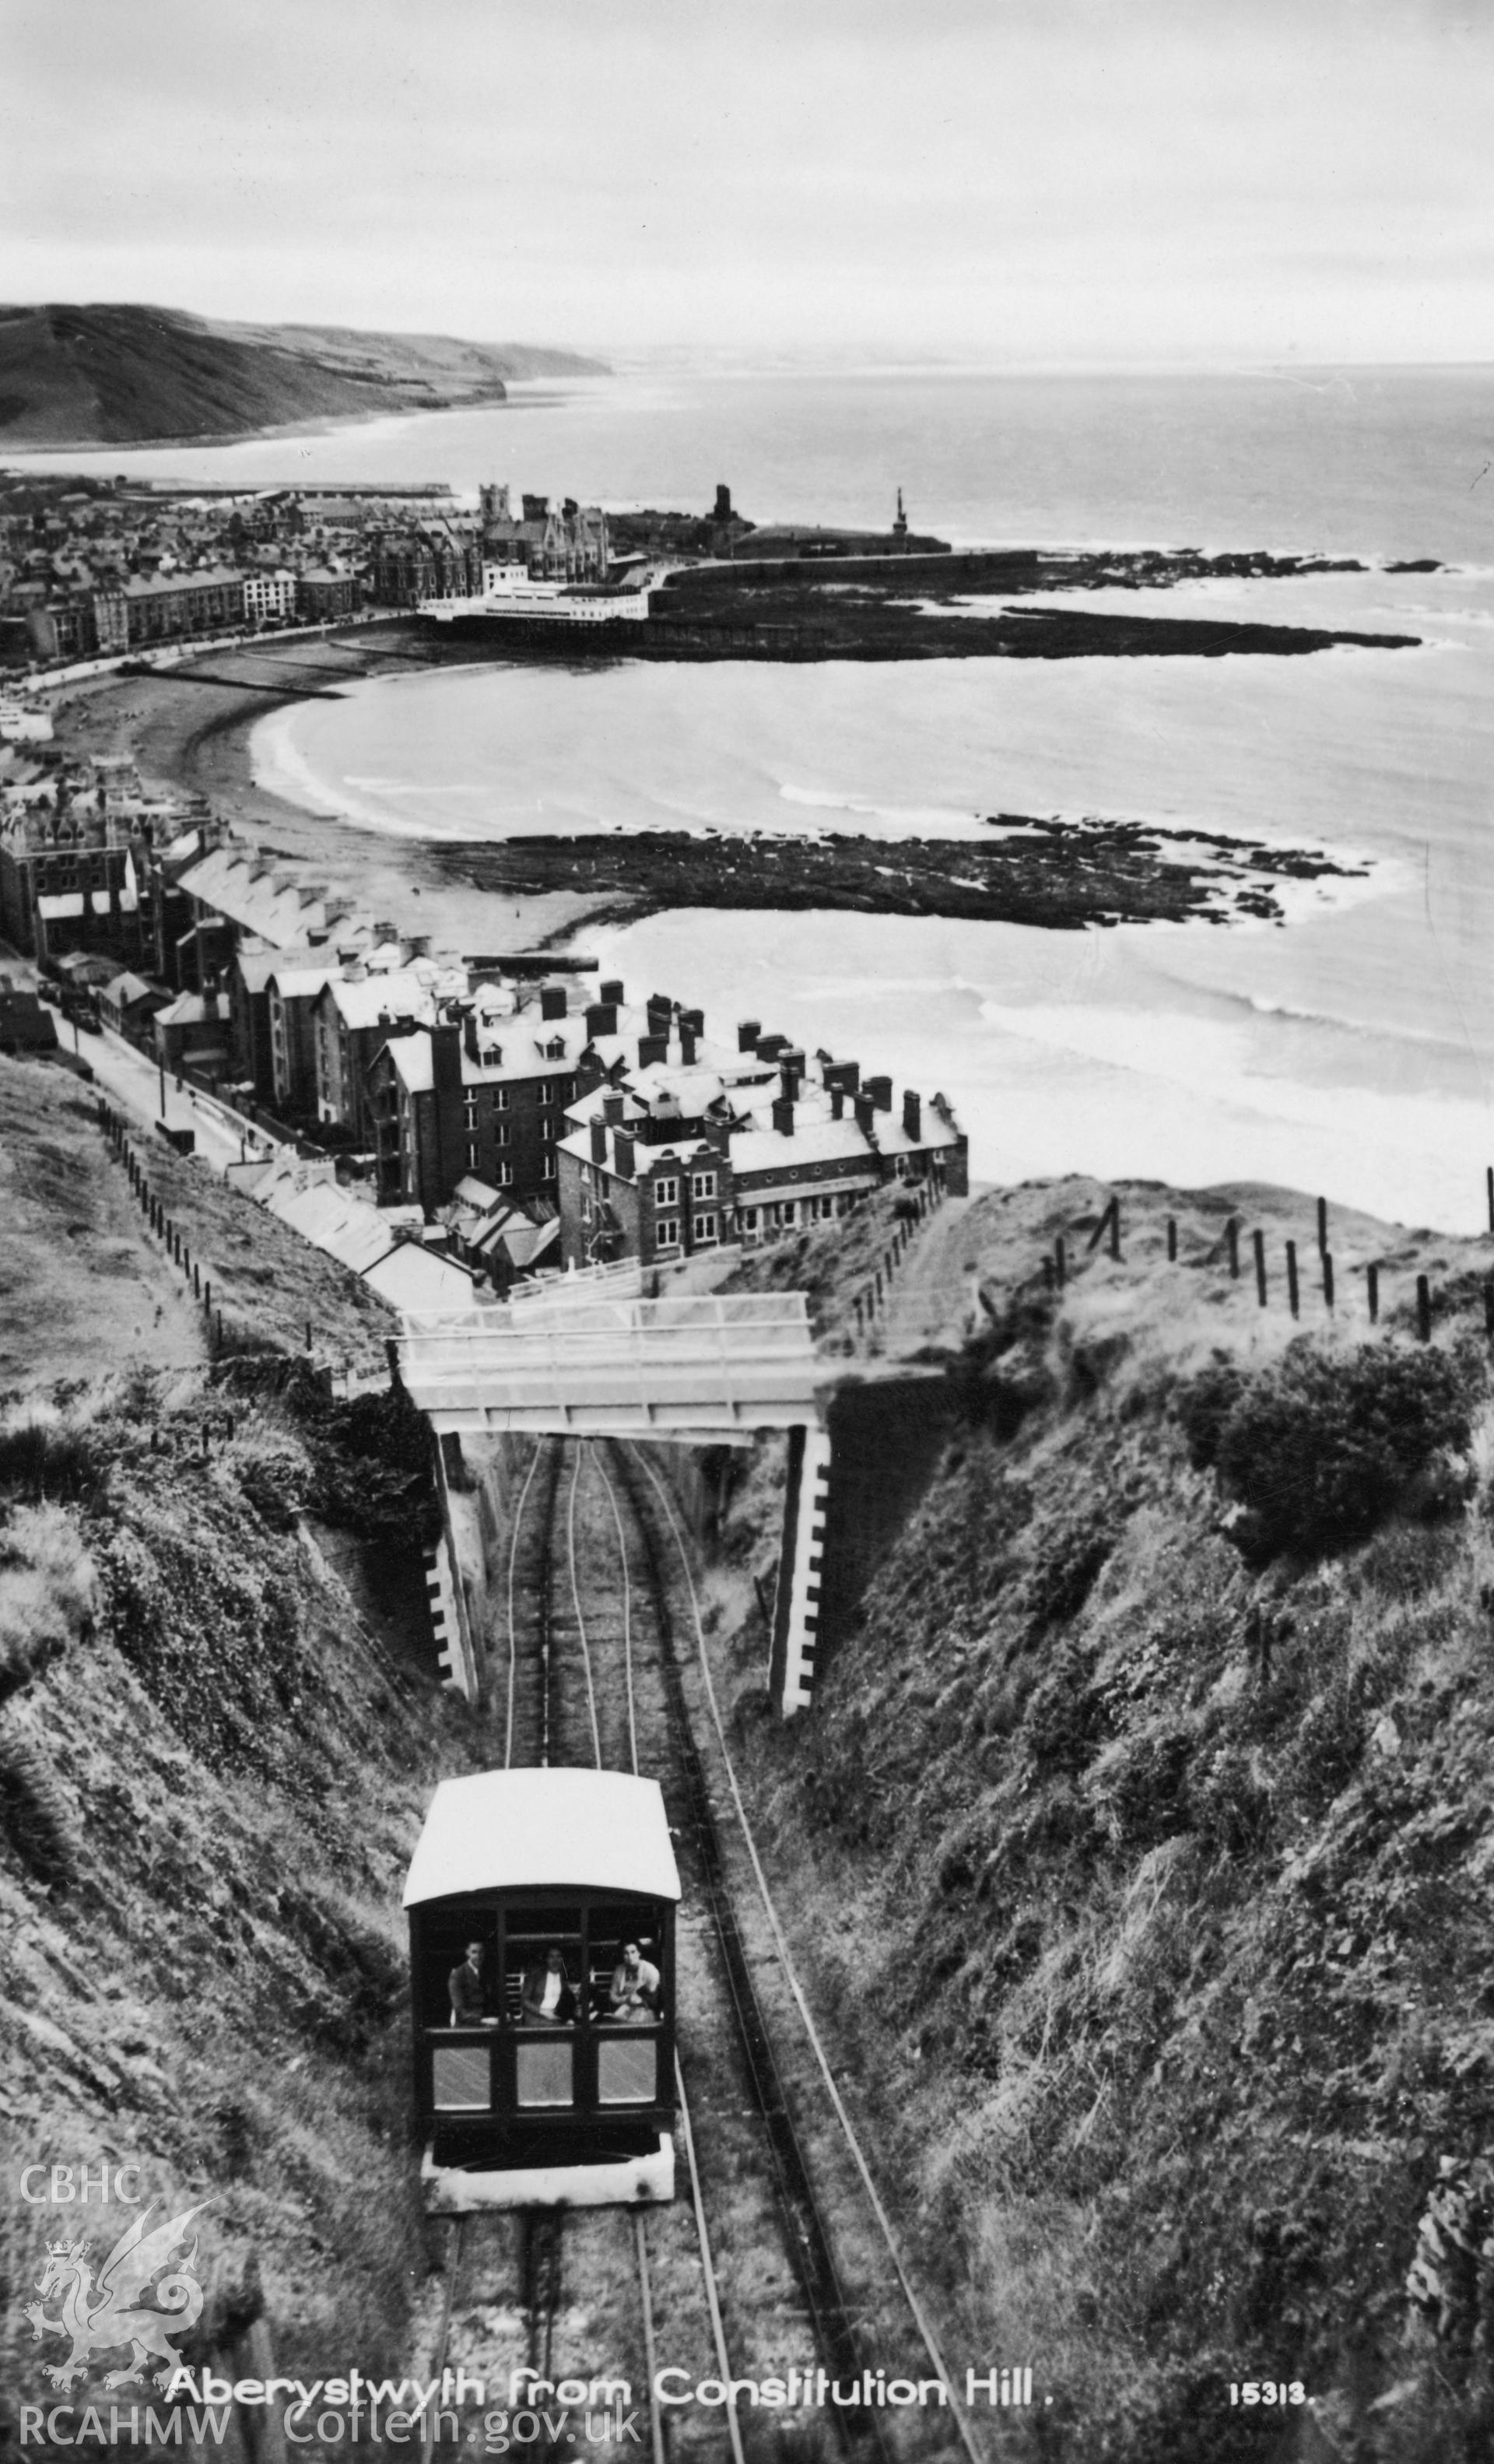 Digital copy of postcard showing Aberystwyth Cliff Railway, dated c. 1980.  Loaned for copying by Charlie Downes.